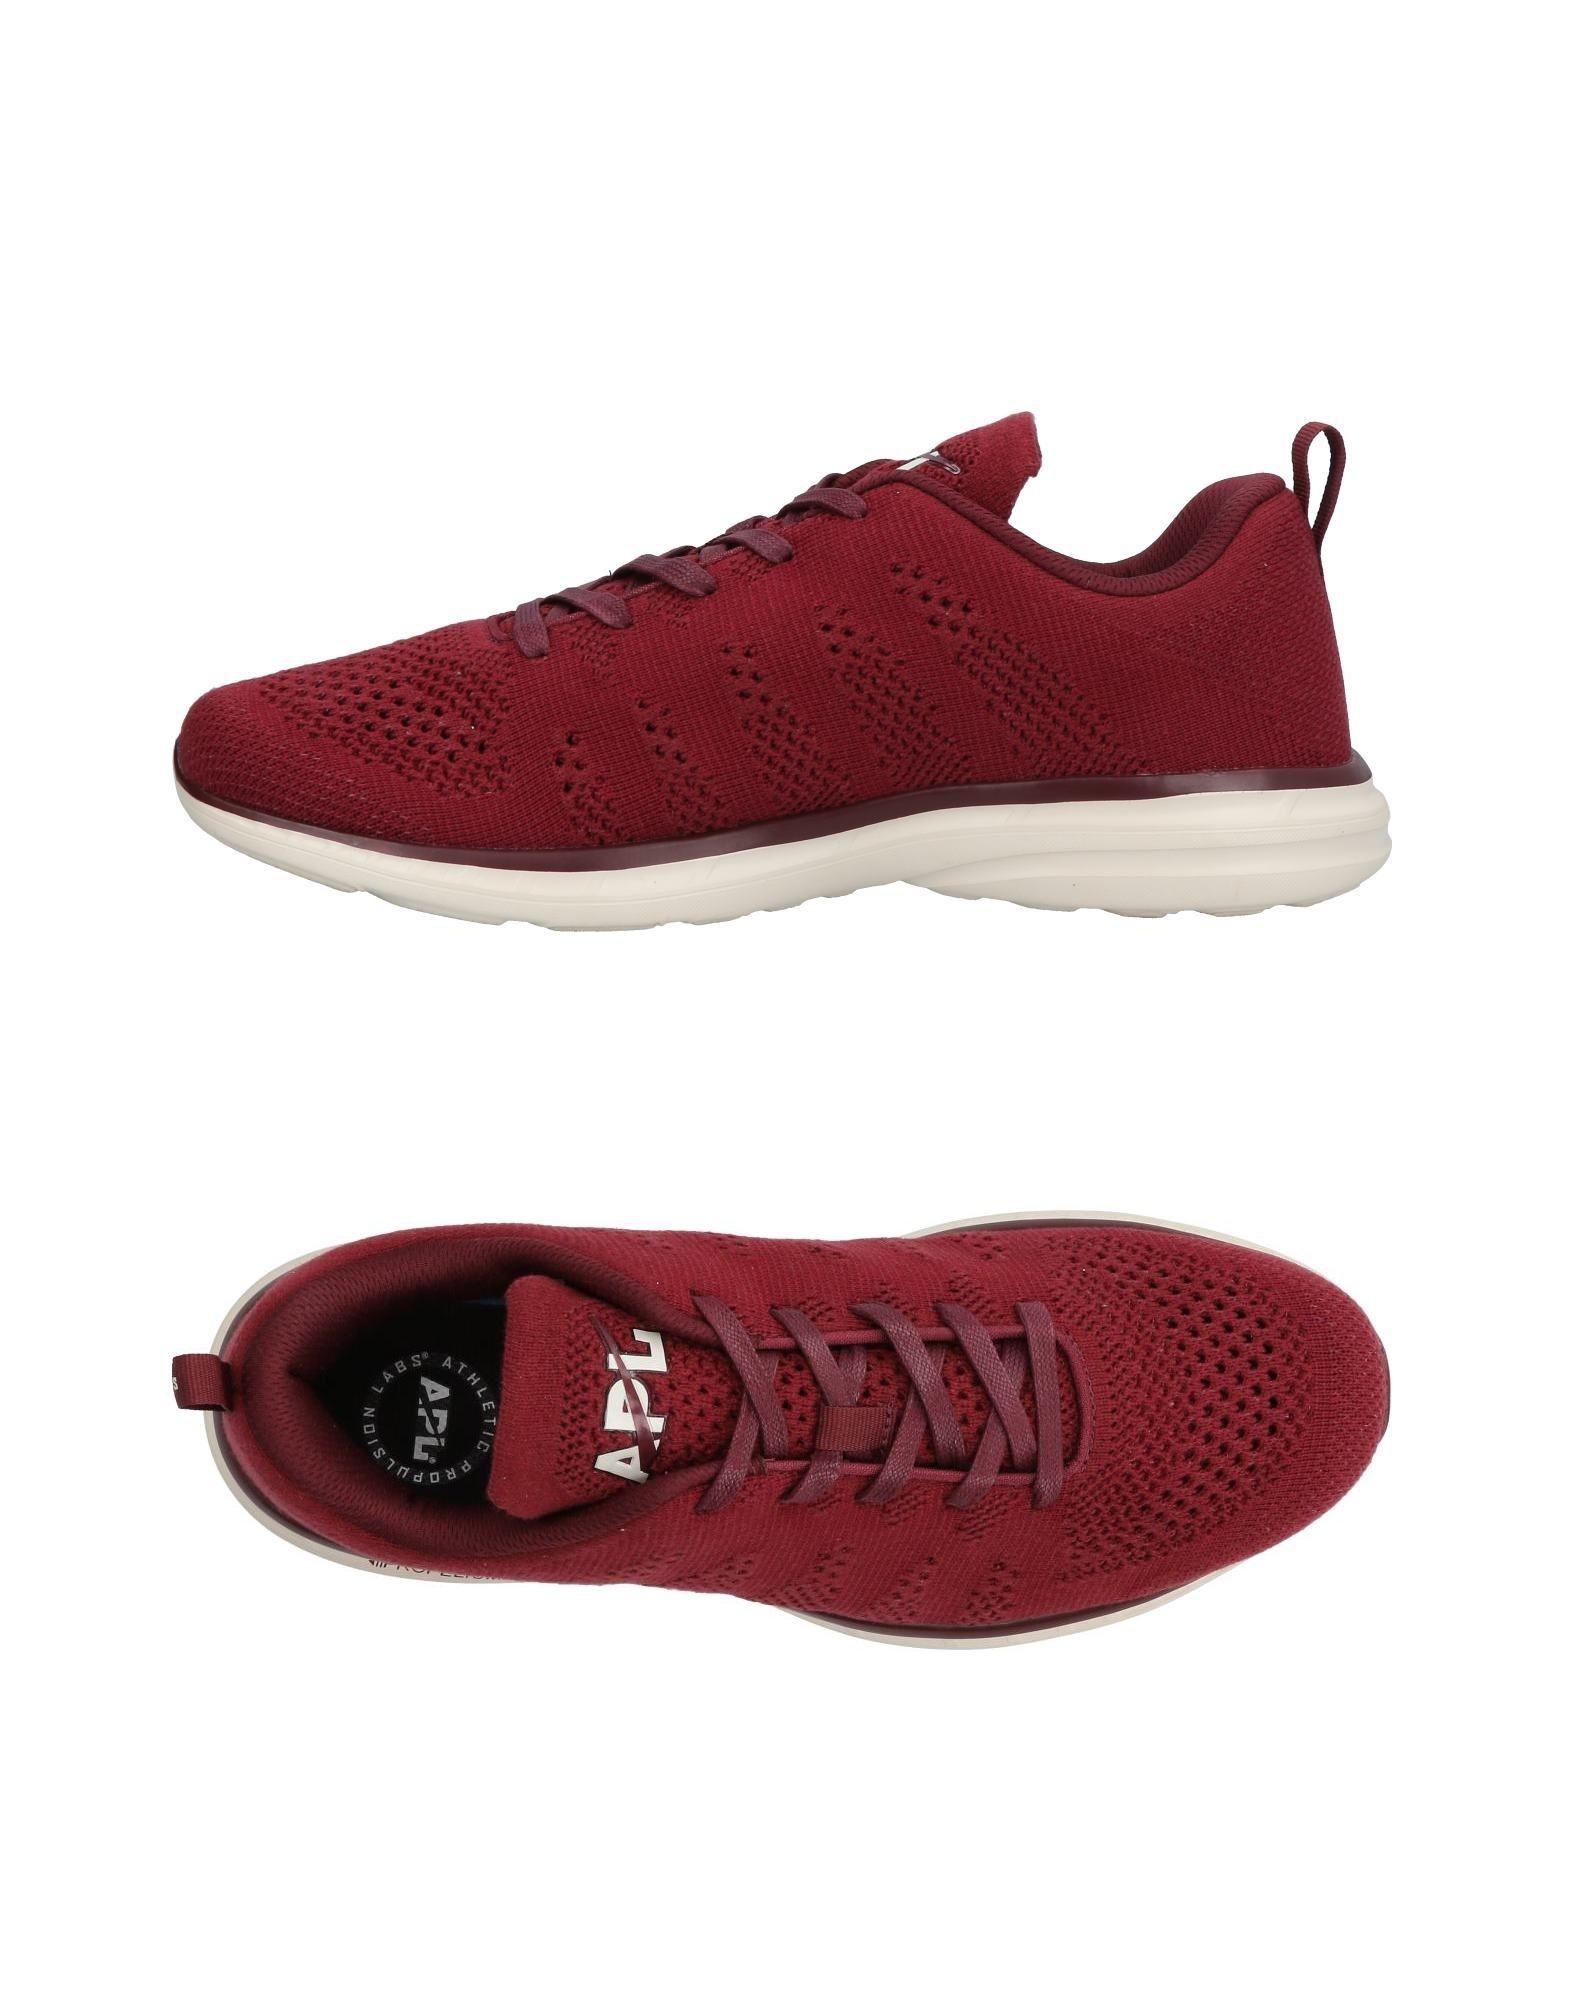 APL Shoes Rubber Low-tops & Sneakers in Maroon (Red) for Men - Lyst